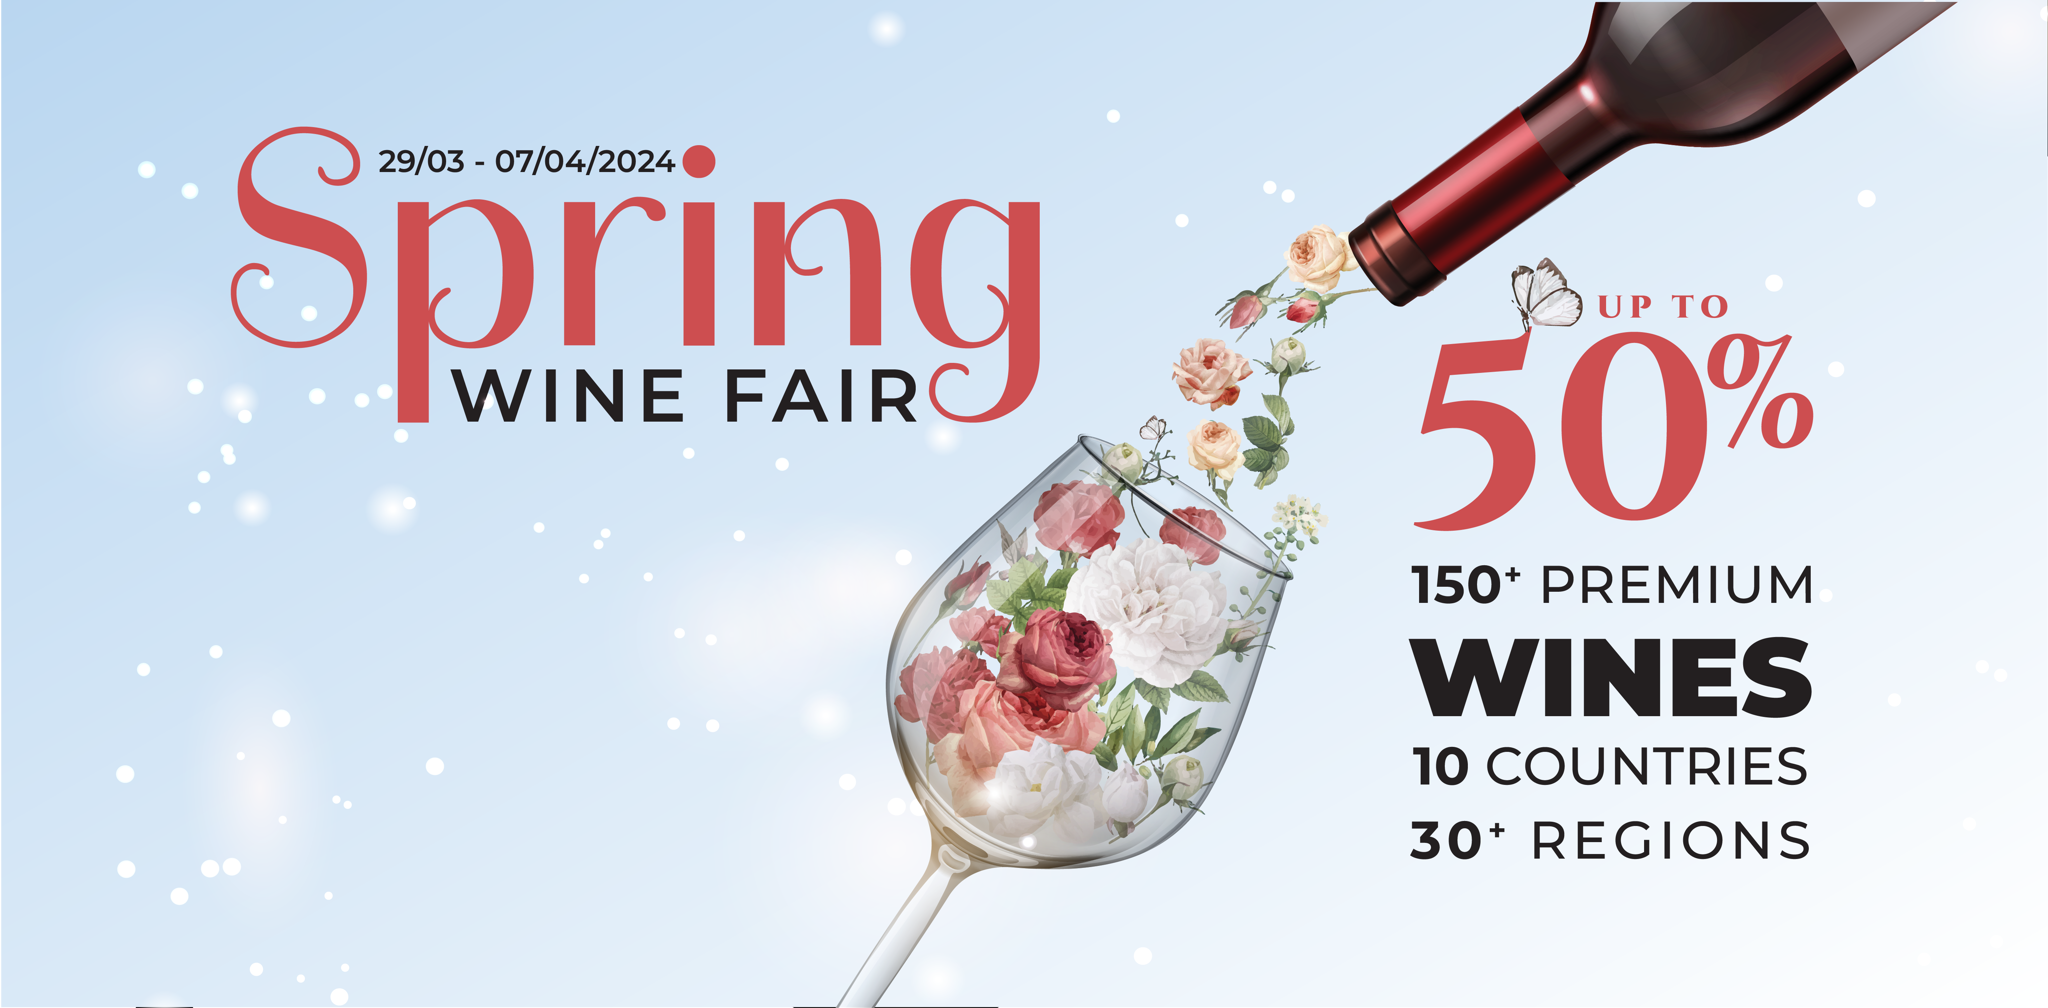 SPRING WINE FAIR | THE BIGGEST PROMOTION OF THE SEASON